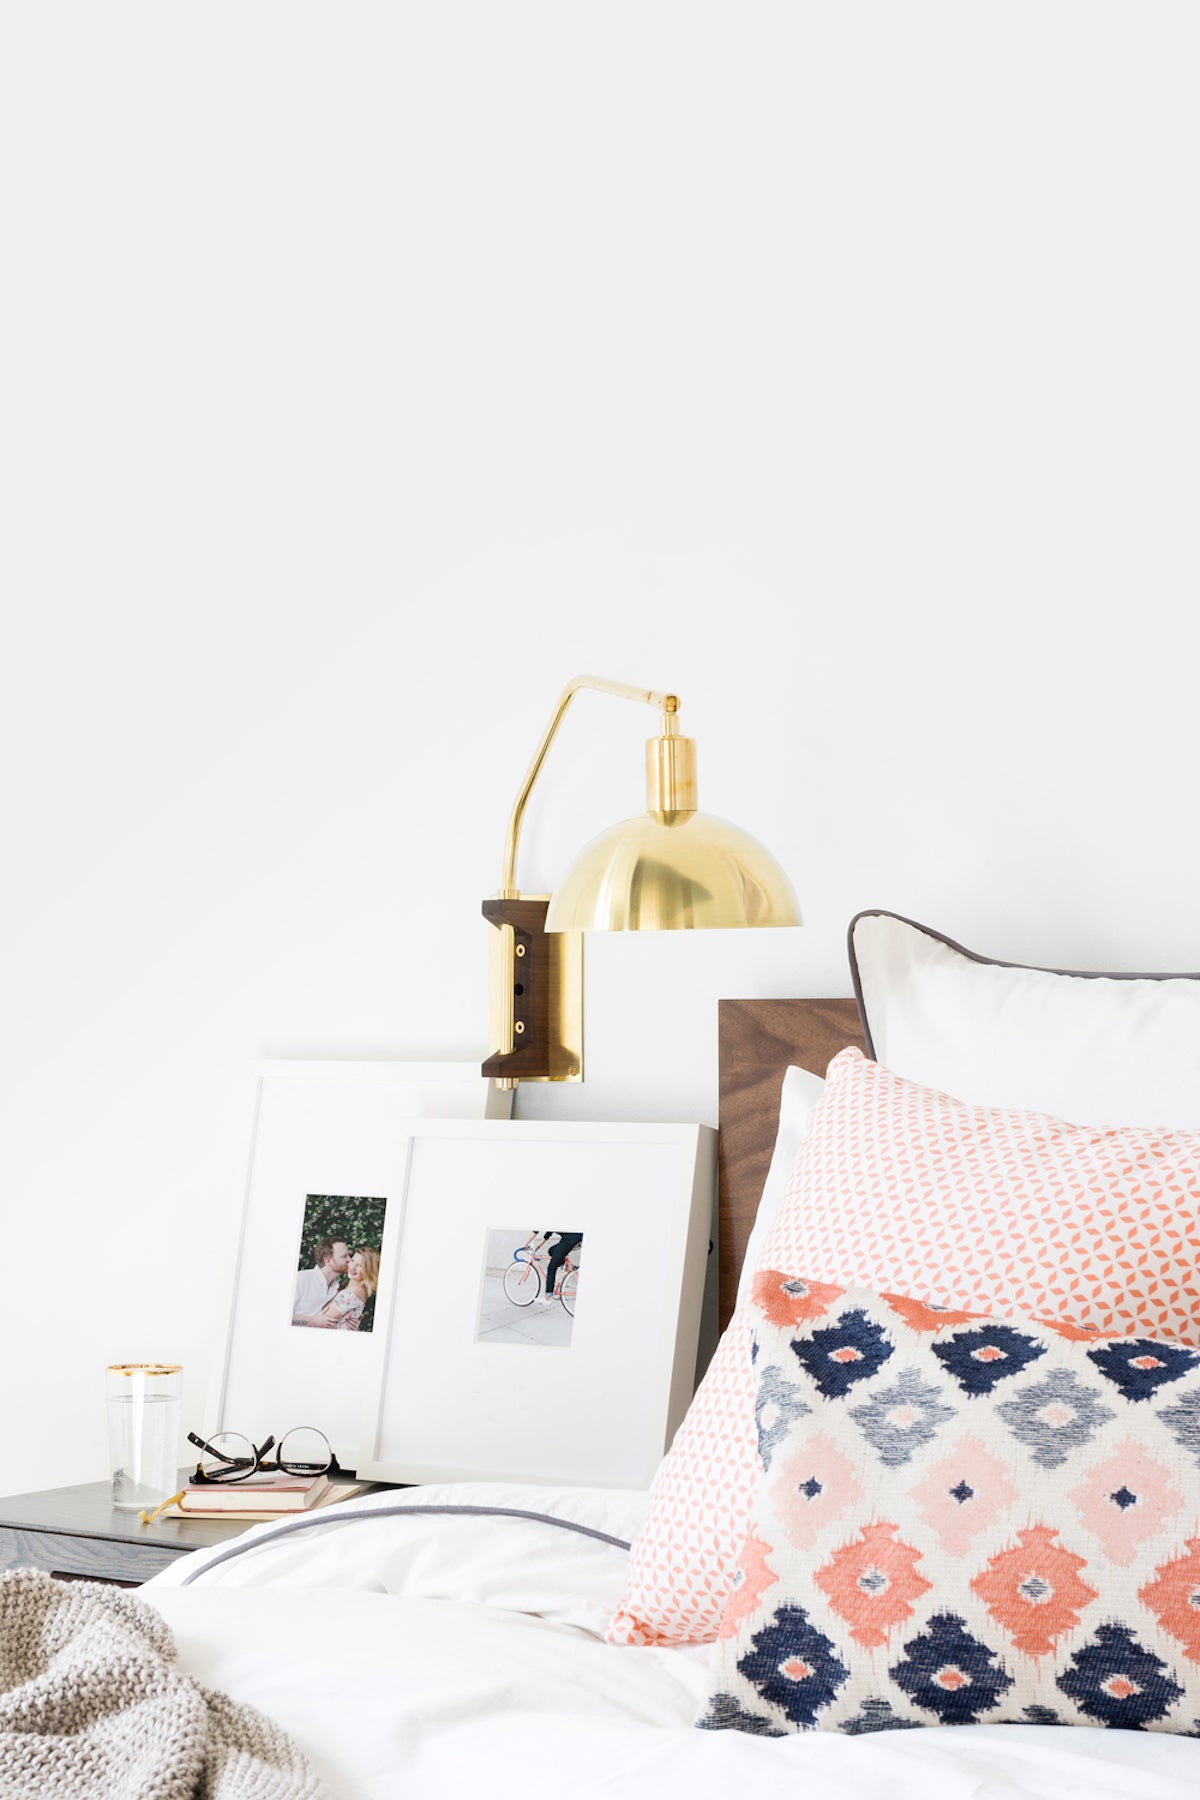 Two white frames on nightstand resting in layered fashion against the wall